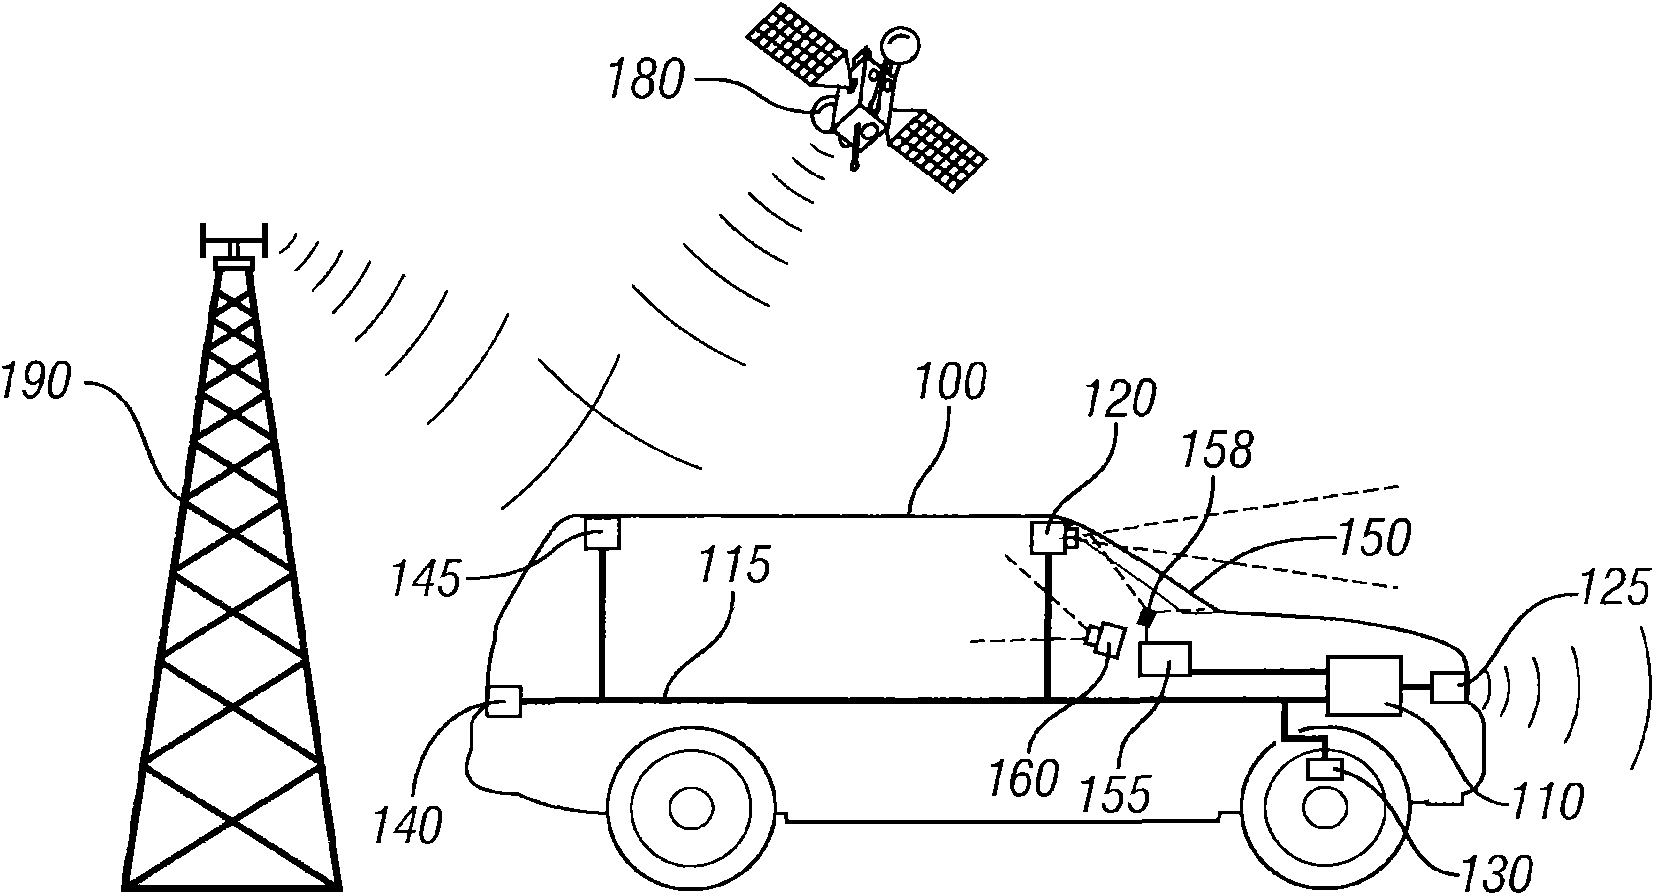 Dynamic vehicle system information on full windshield head-up display